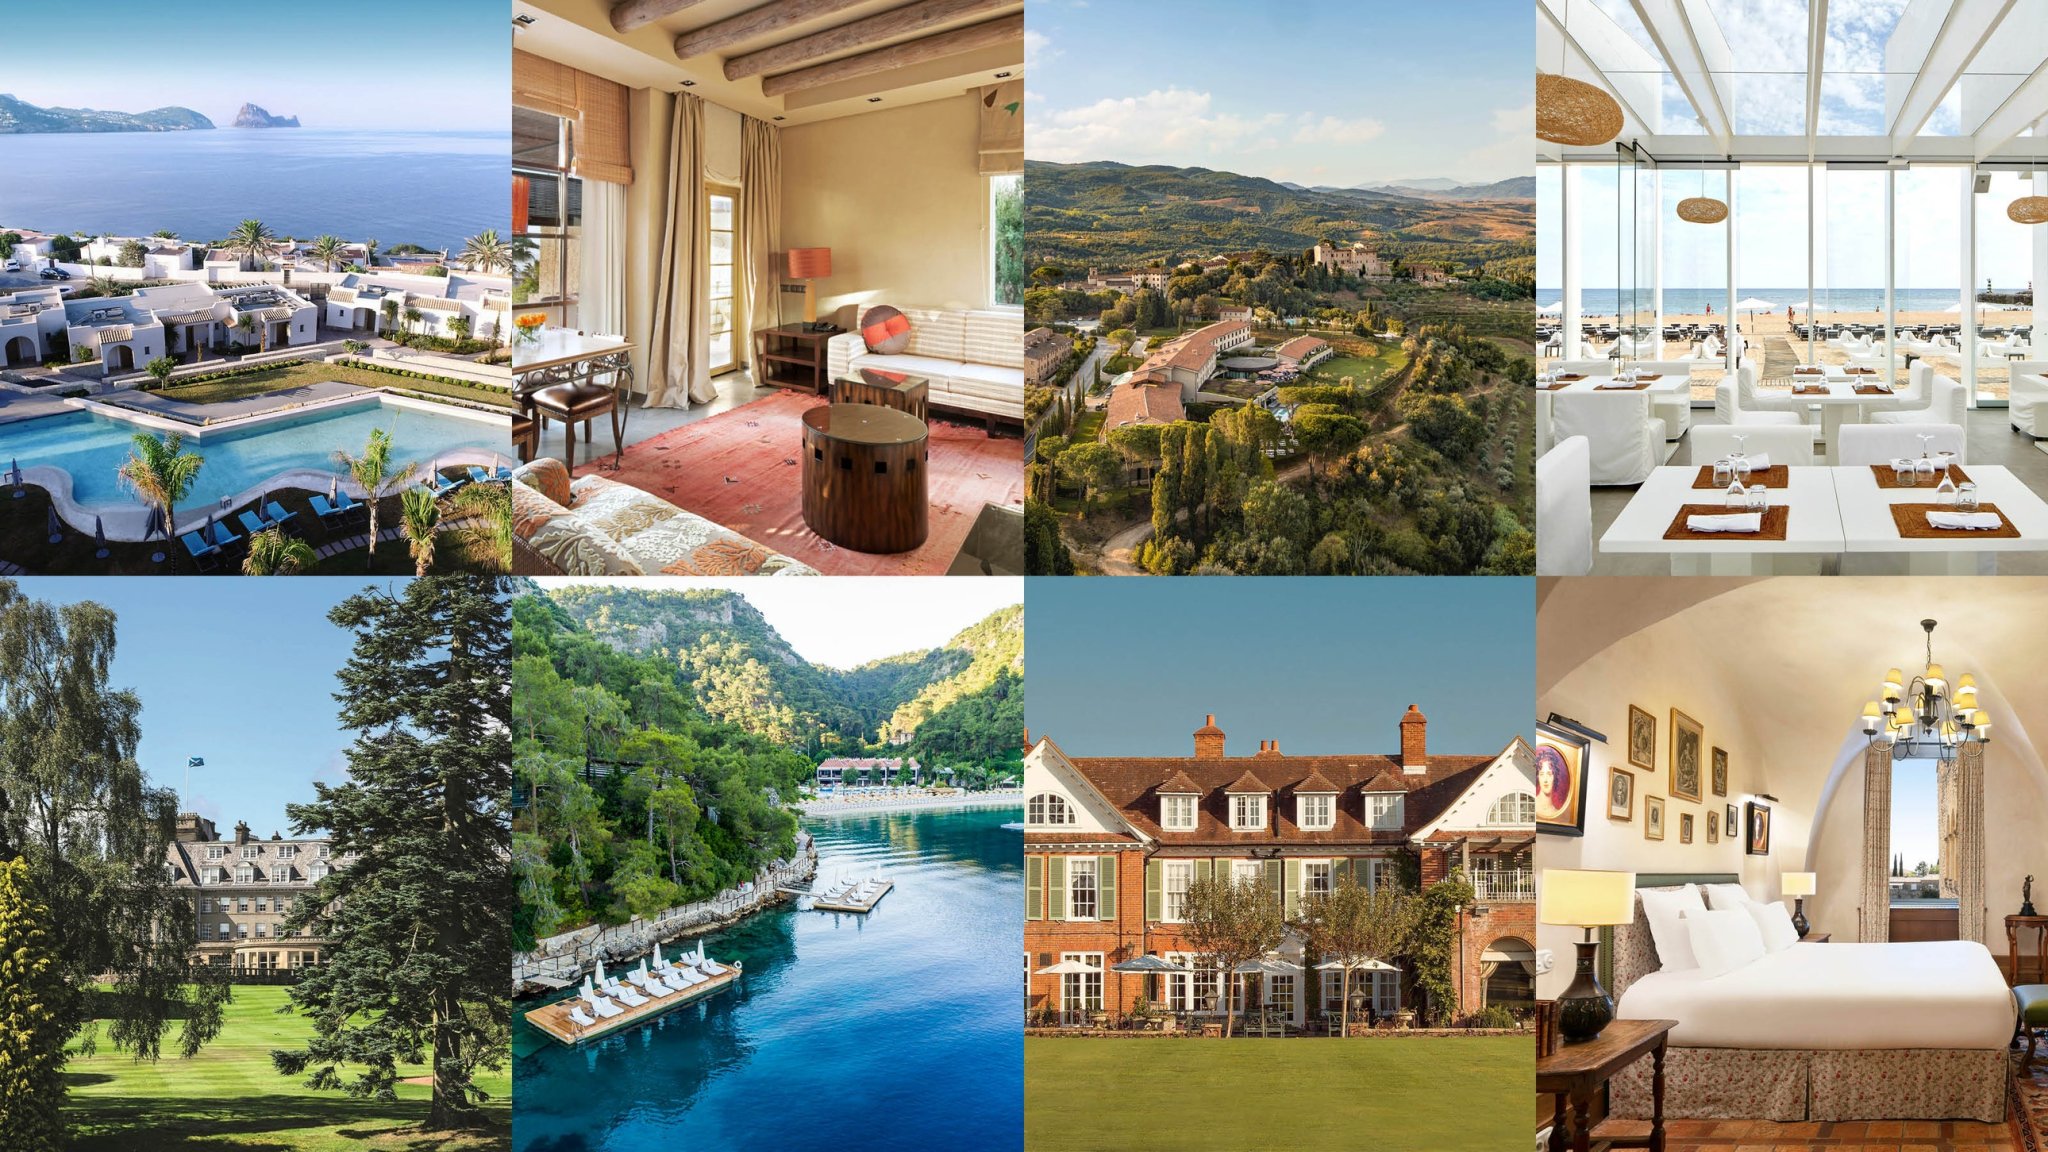 The best hotels and resorts in Europe: Readers' Choice Awards 2021